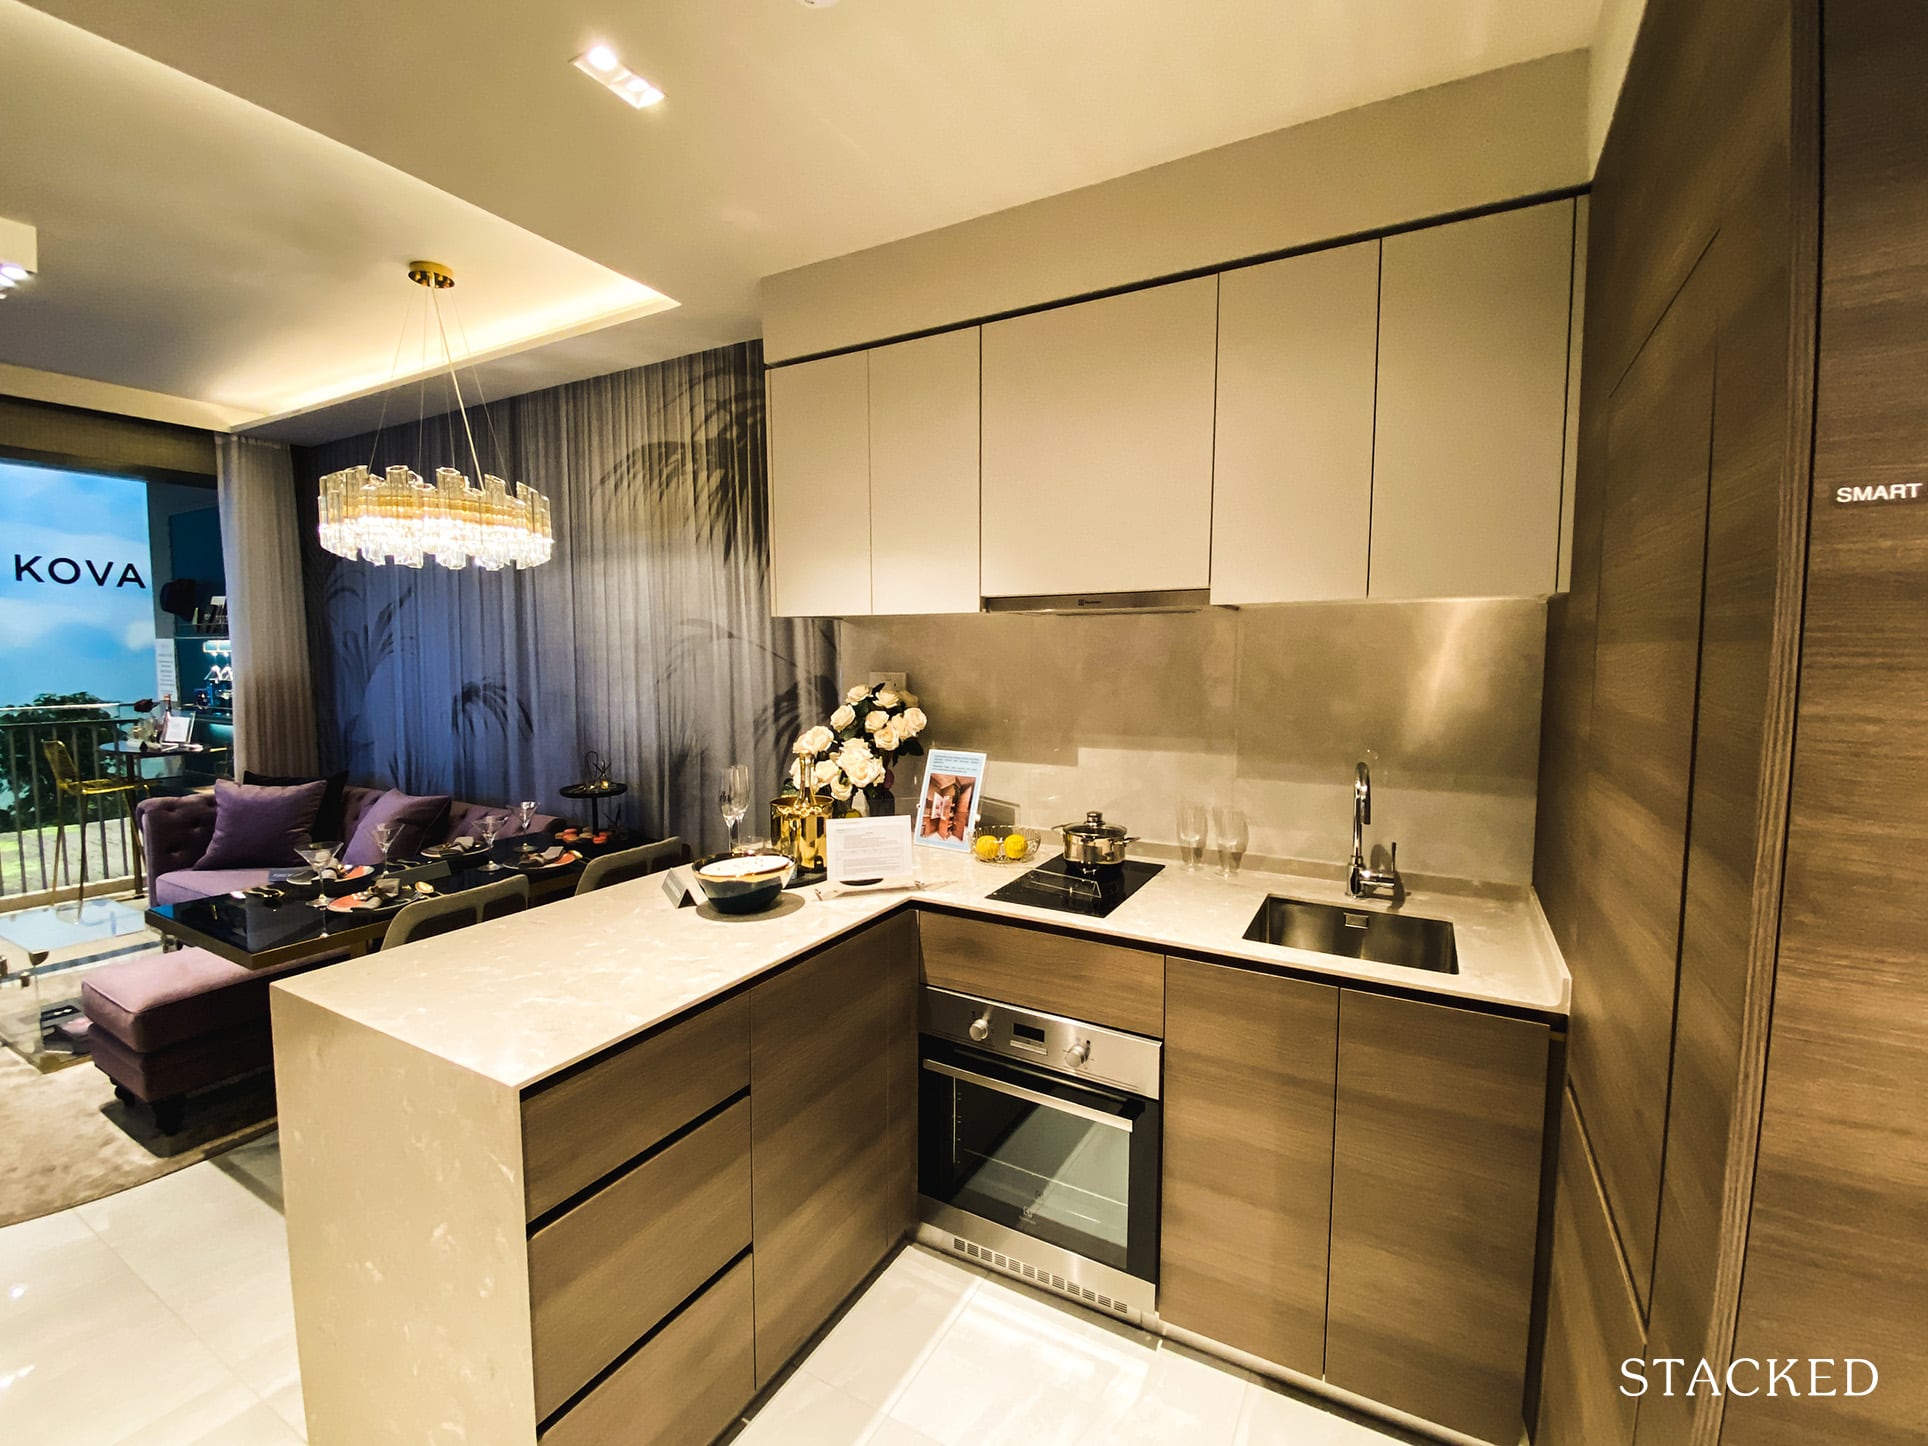 Florence Residences 2 bedroom deluxe kitchen